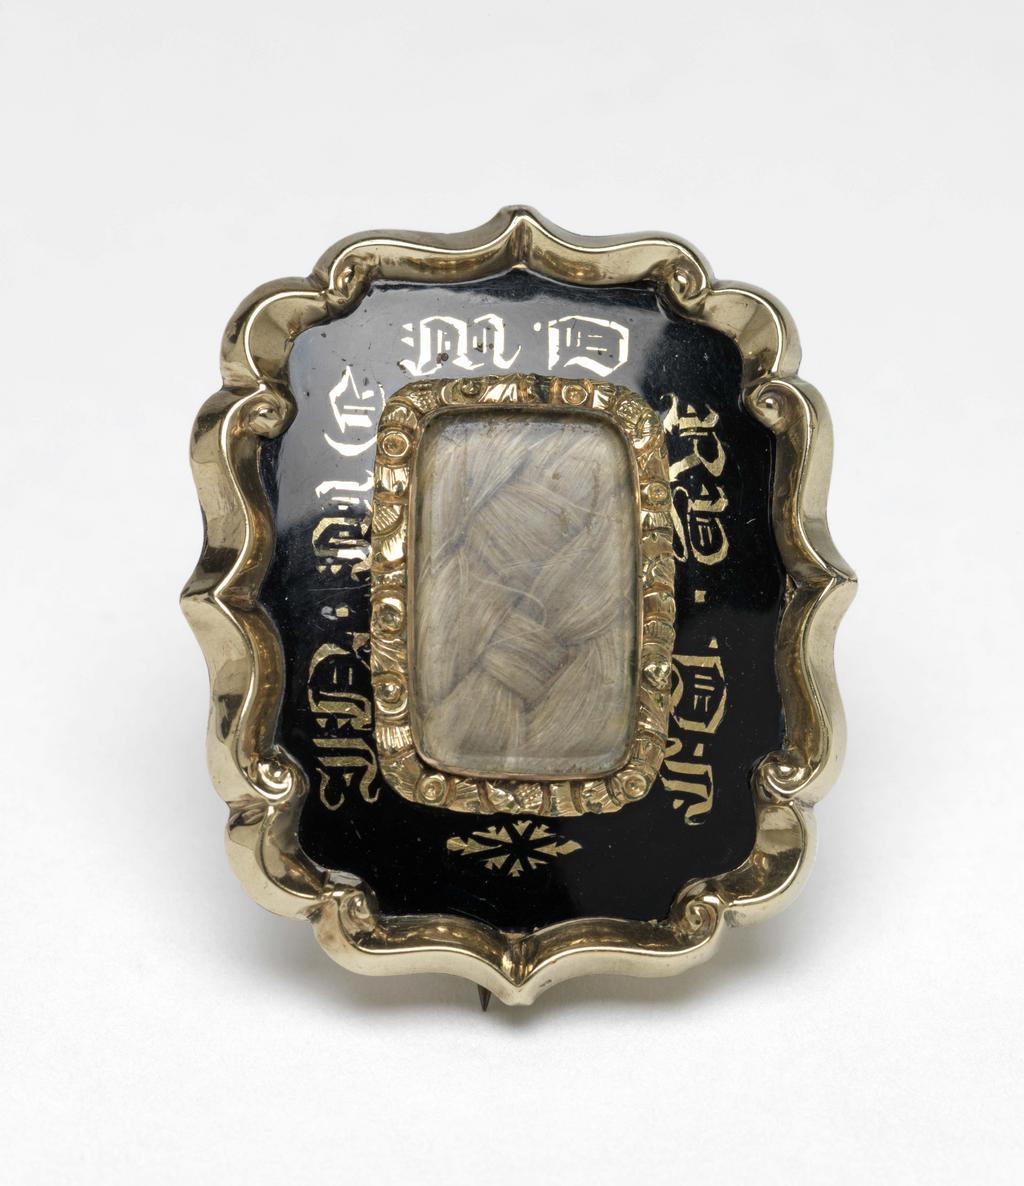 An image of Jewellery. Mourning brooch. Unknown maker, probably Ireland or England. Rectangular brooch, with a gold outer frame that has round corners and raised cusped and scalloped edges, with, in the centre, a rectangular compartment containing inter-woven blonde hair under glass, mounted in a plain gold rub-over setting, surrounded by a foliated gold frame. Between the outer and inner frames, the flat area of the brooch is enamelled onto a copper alloy plate in a translucent dark blue enamel that optically appears opaque black, and bears a gilt flower head at one end, the gothic initials MD at the opposite end, and, on the two long sides, the gothic initials RD, DI? and J?N?, MT? respectively. The gold back-plate is engraved 'Matilda/Obit 17th Feby/1842'. Brooch-pin fastening on the back: silver alloy or nickel-silver catch-plate and hinge-plate with a copper alloy (probably copper) pin. The lower quality of the fastening and excess solder around the hinge-plate suggest the pin is a replacement or later addition. The hinge plate partly covers an indentation in the gold back-plate that may relate to an earlier fitting. Gold ring with black enamel decorated with gilding, containing plaited hair under glass, width, whole, 2.6 cm, length, whole, 3.2 cm, circa 1842. Notes: The brooch belonged to Matilda Barnes (1829-1914), née Armstrong, who was born and brought up in Ireland but lived in England after her marriage to the donor's late husband's grandfather. The inscription does not refer to a member of the family.